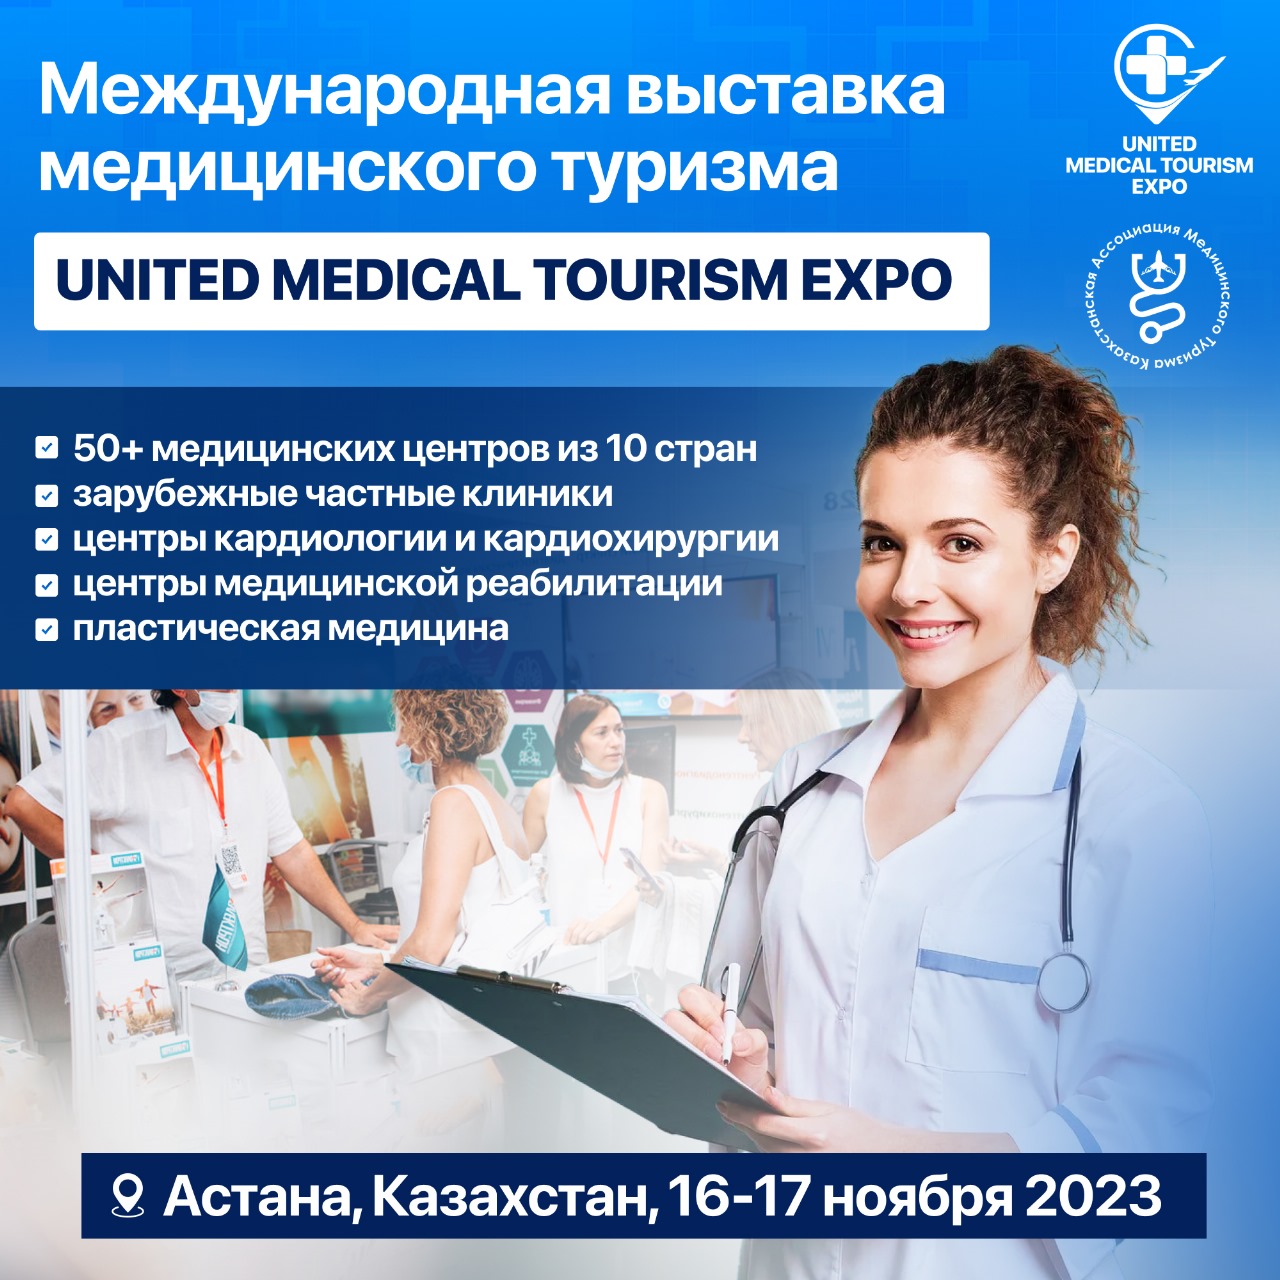 EXPO ХКО-да UNITED MEDICAL TOURISM EXPO 2023 медициналық туризм көрмесі өтеді